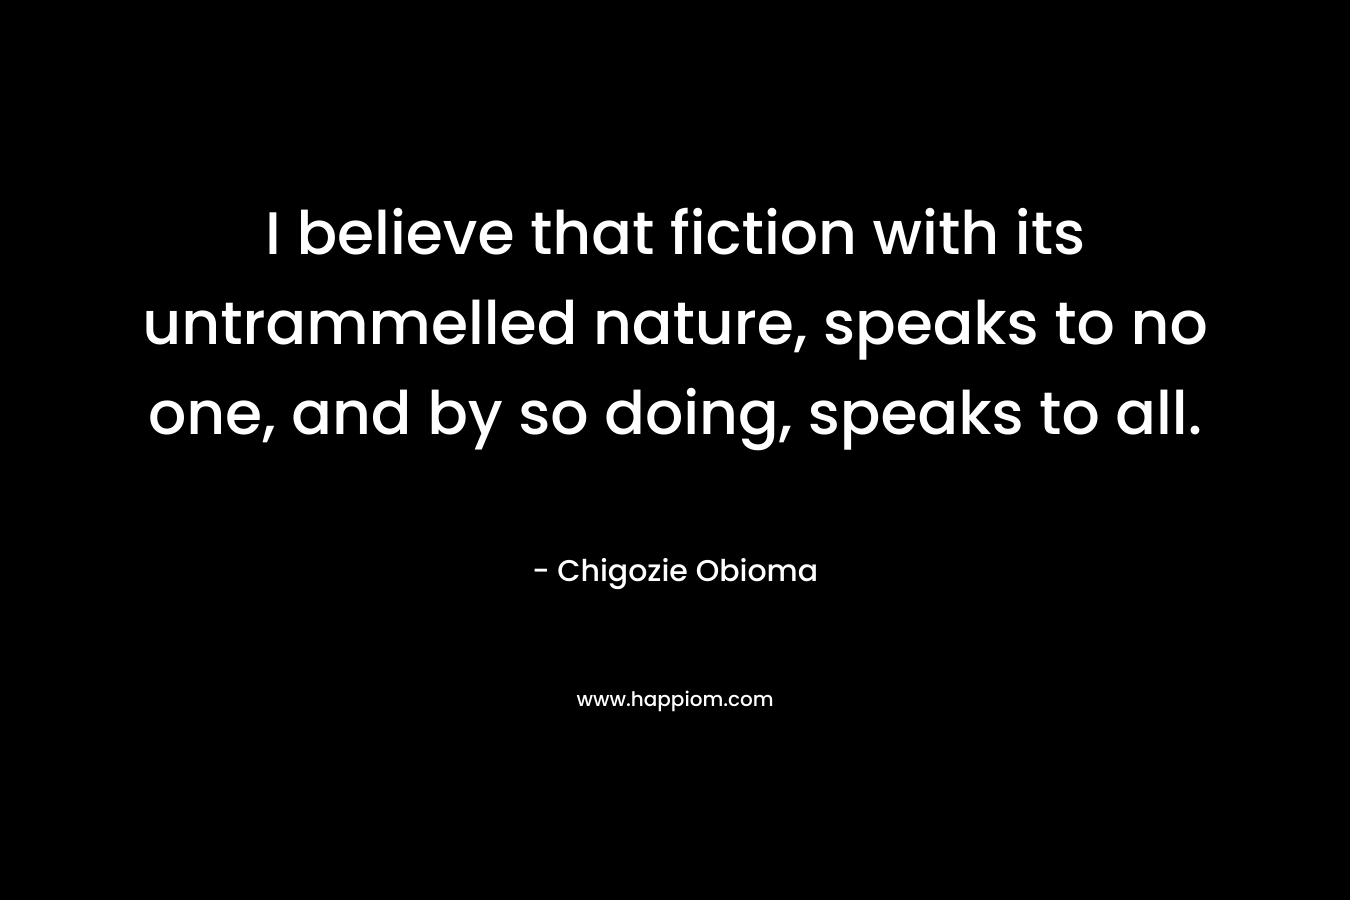 I believe that fiction with its untrammelled nature, speaks to no one, and by so doing, speaks to all.